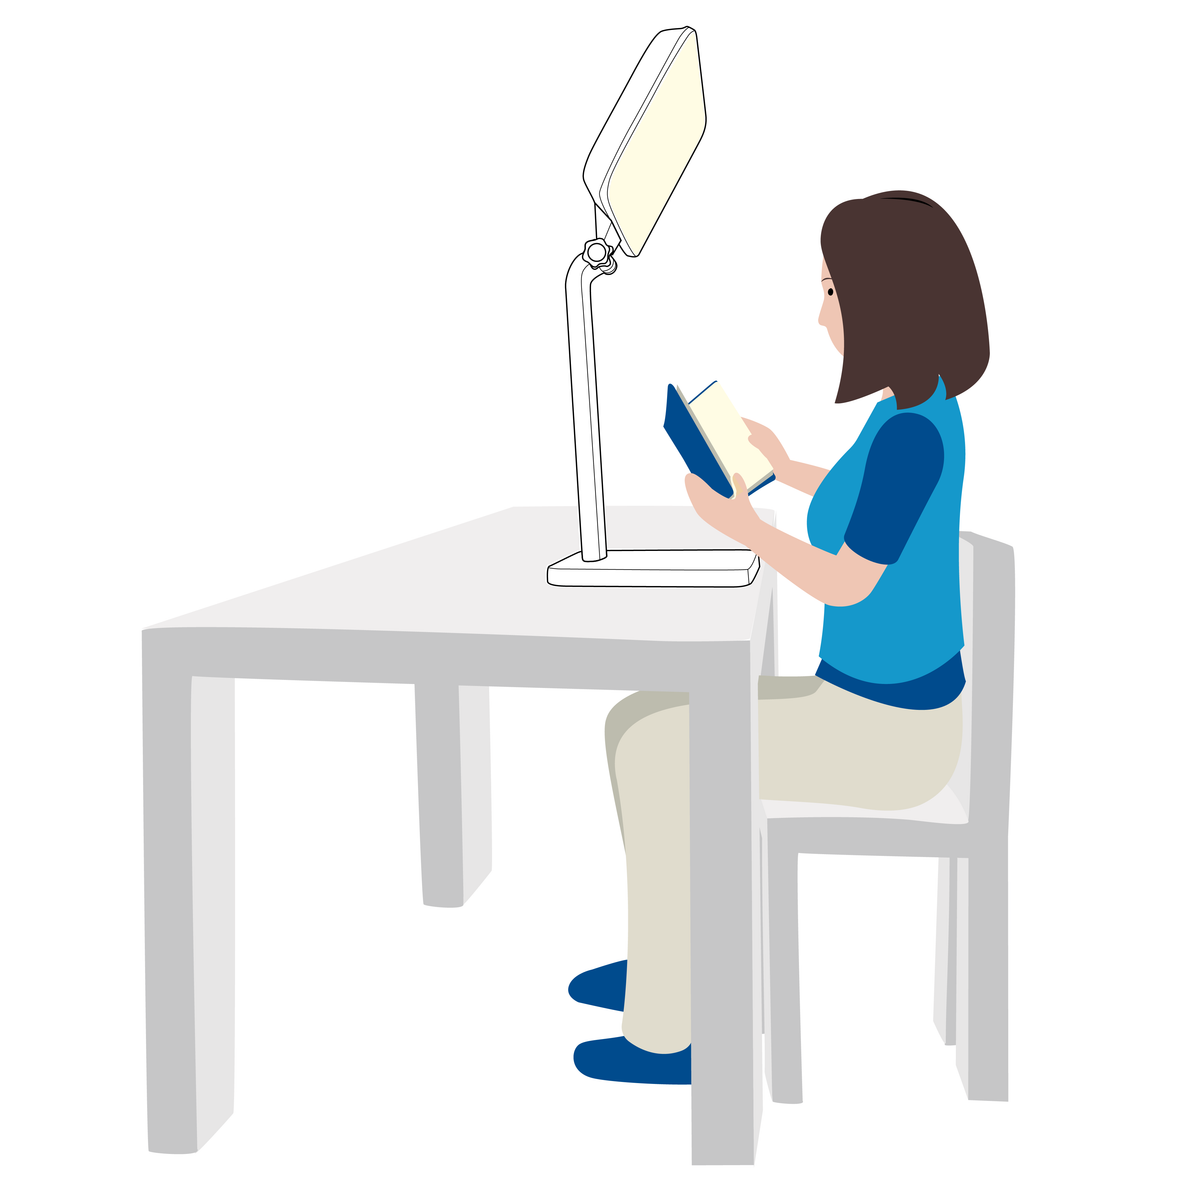 A graphic of a woman using a therapy lamp that’s too close